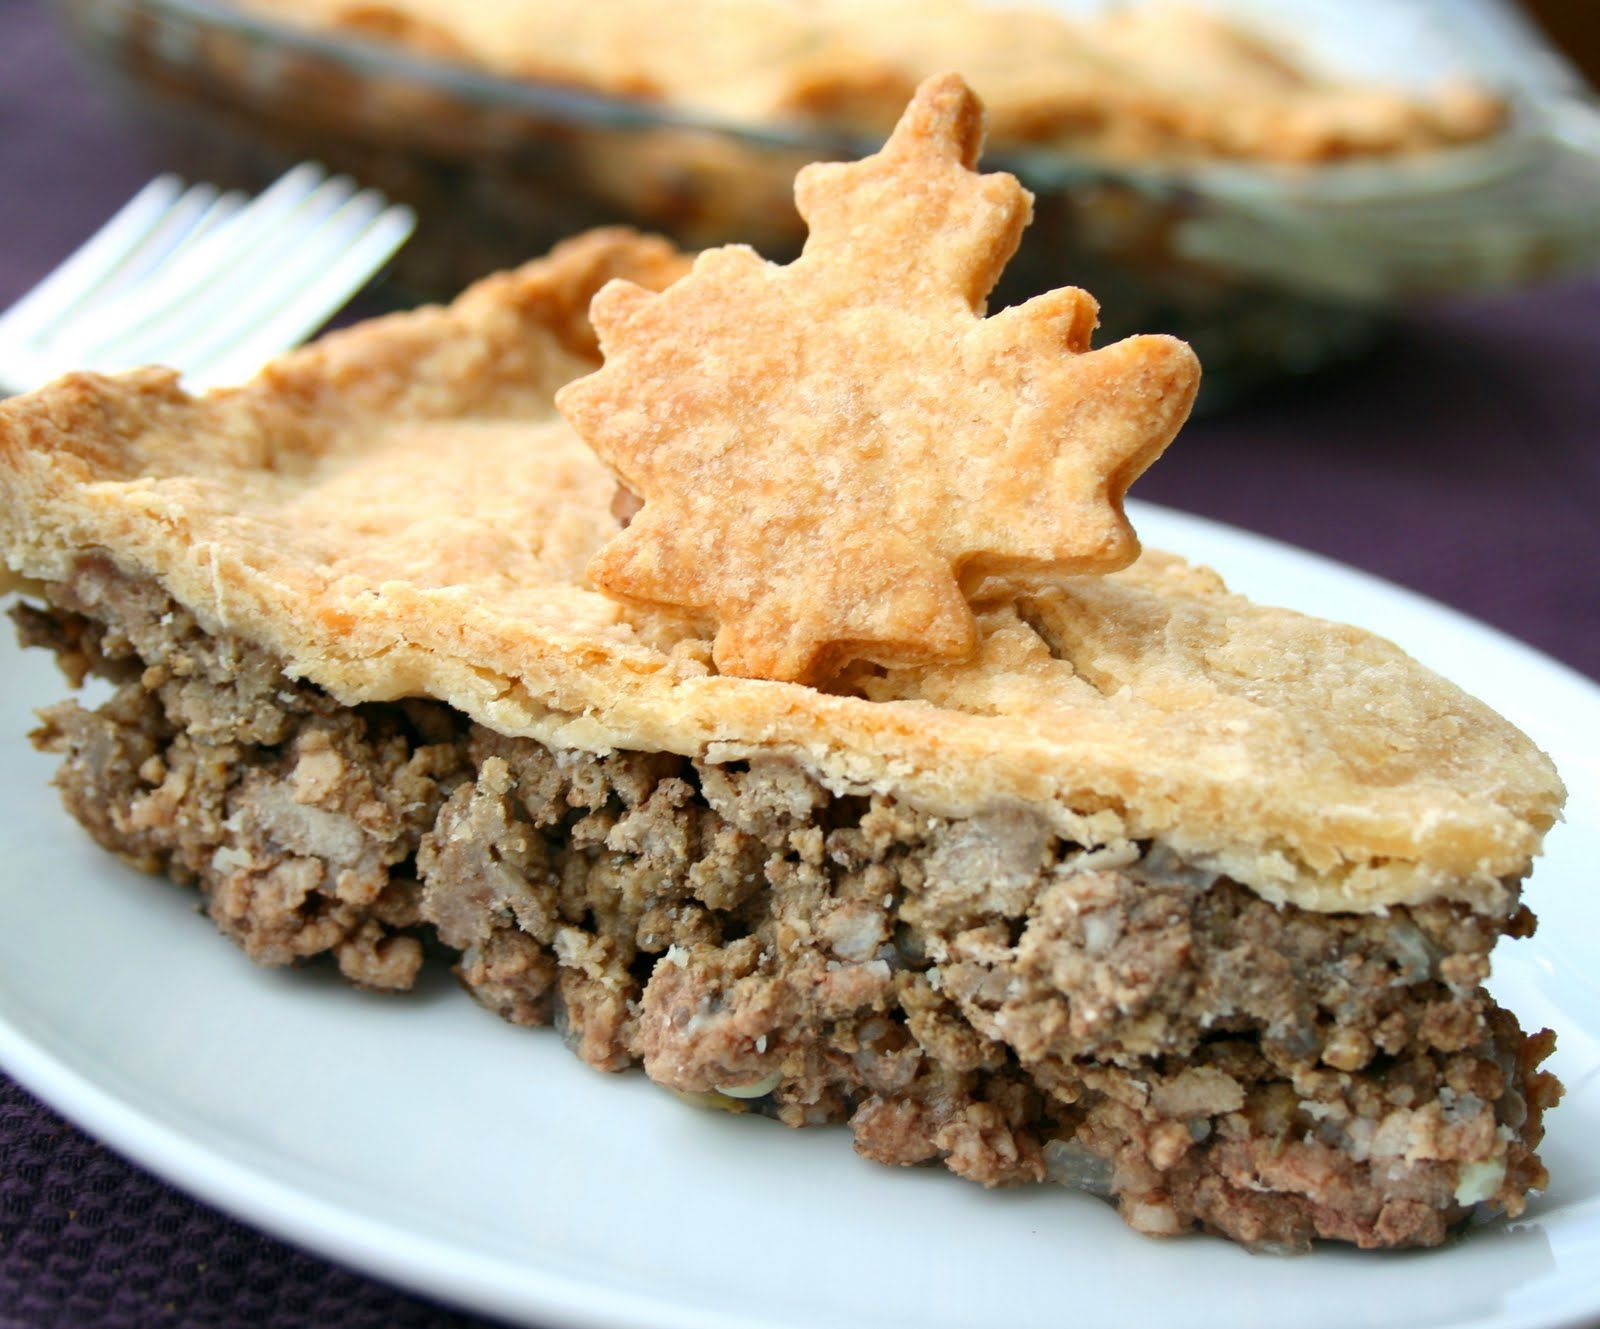 a meat pie from canada, toutiere